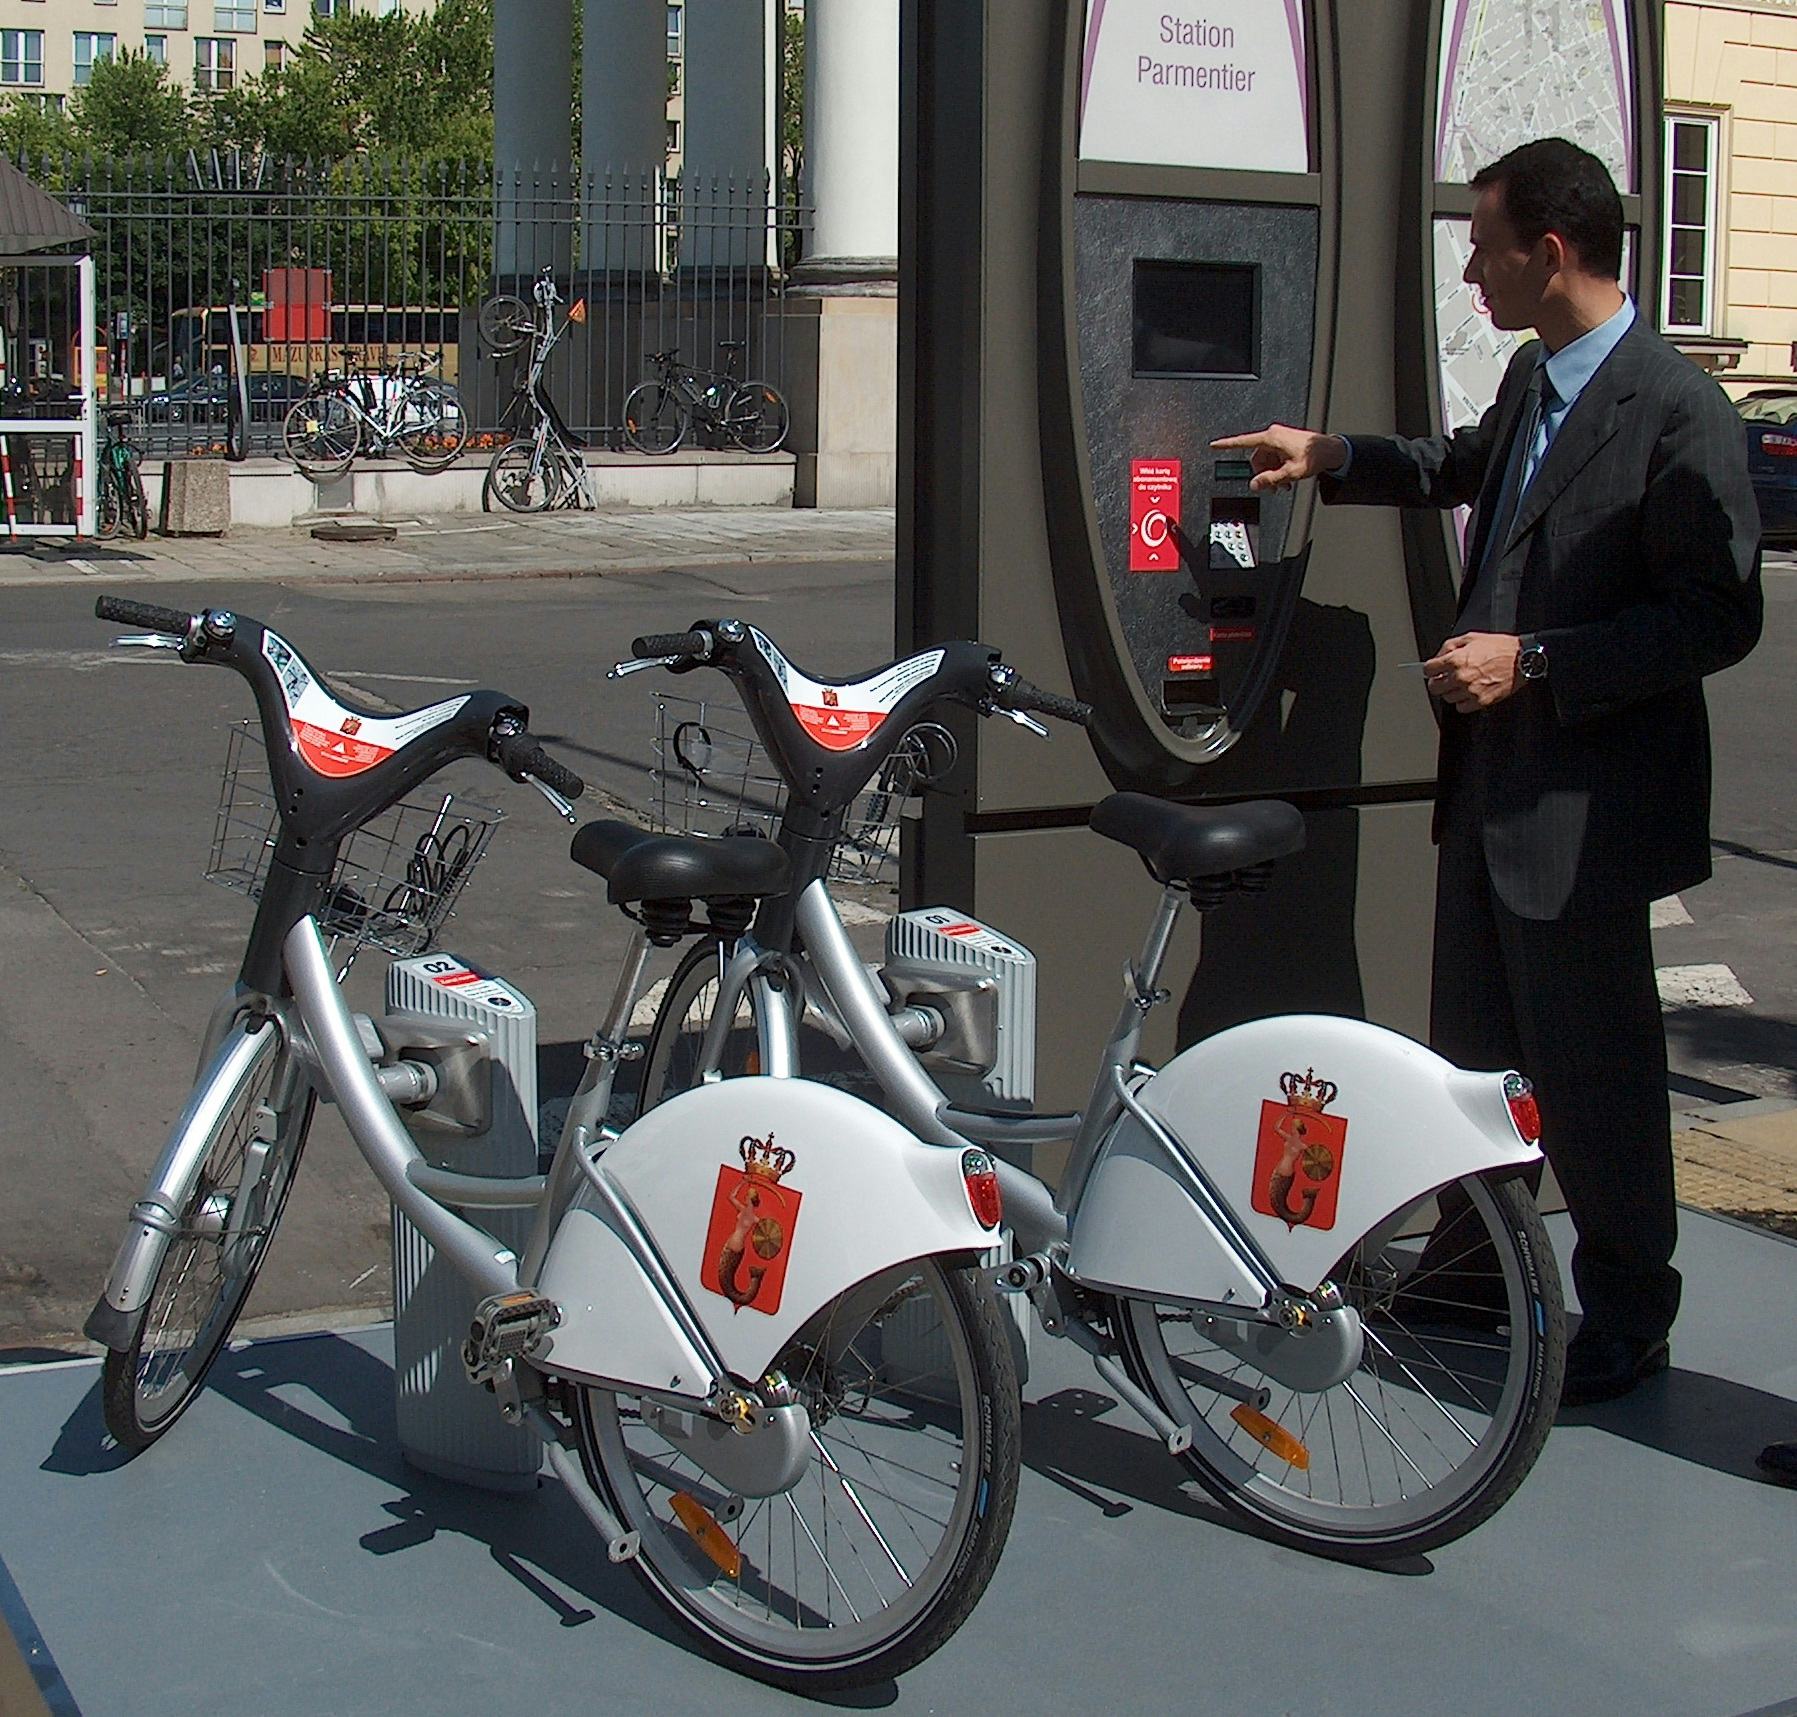 Public bikes are now used by more than 600 cities around the globe. – Photo Warsaw bike scheme